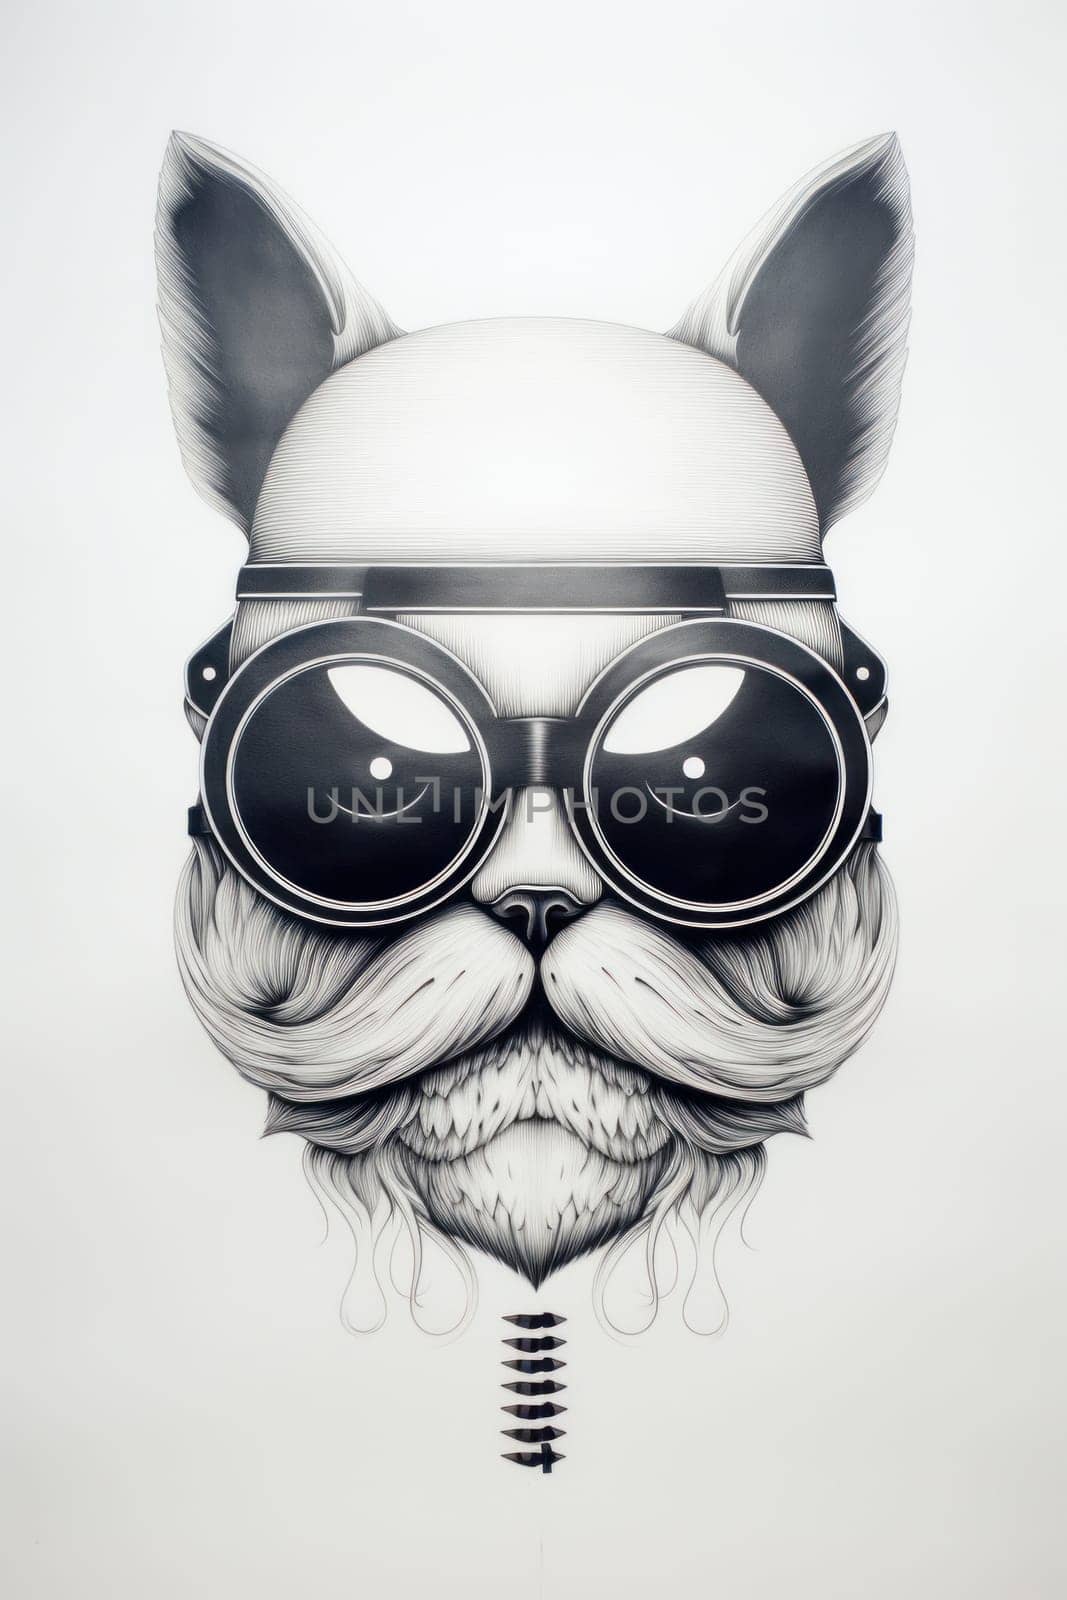 A black and white drawing of a cat wearing sunglasses, AI by starush